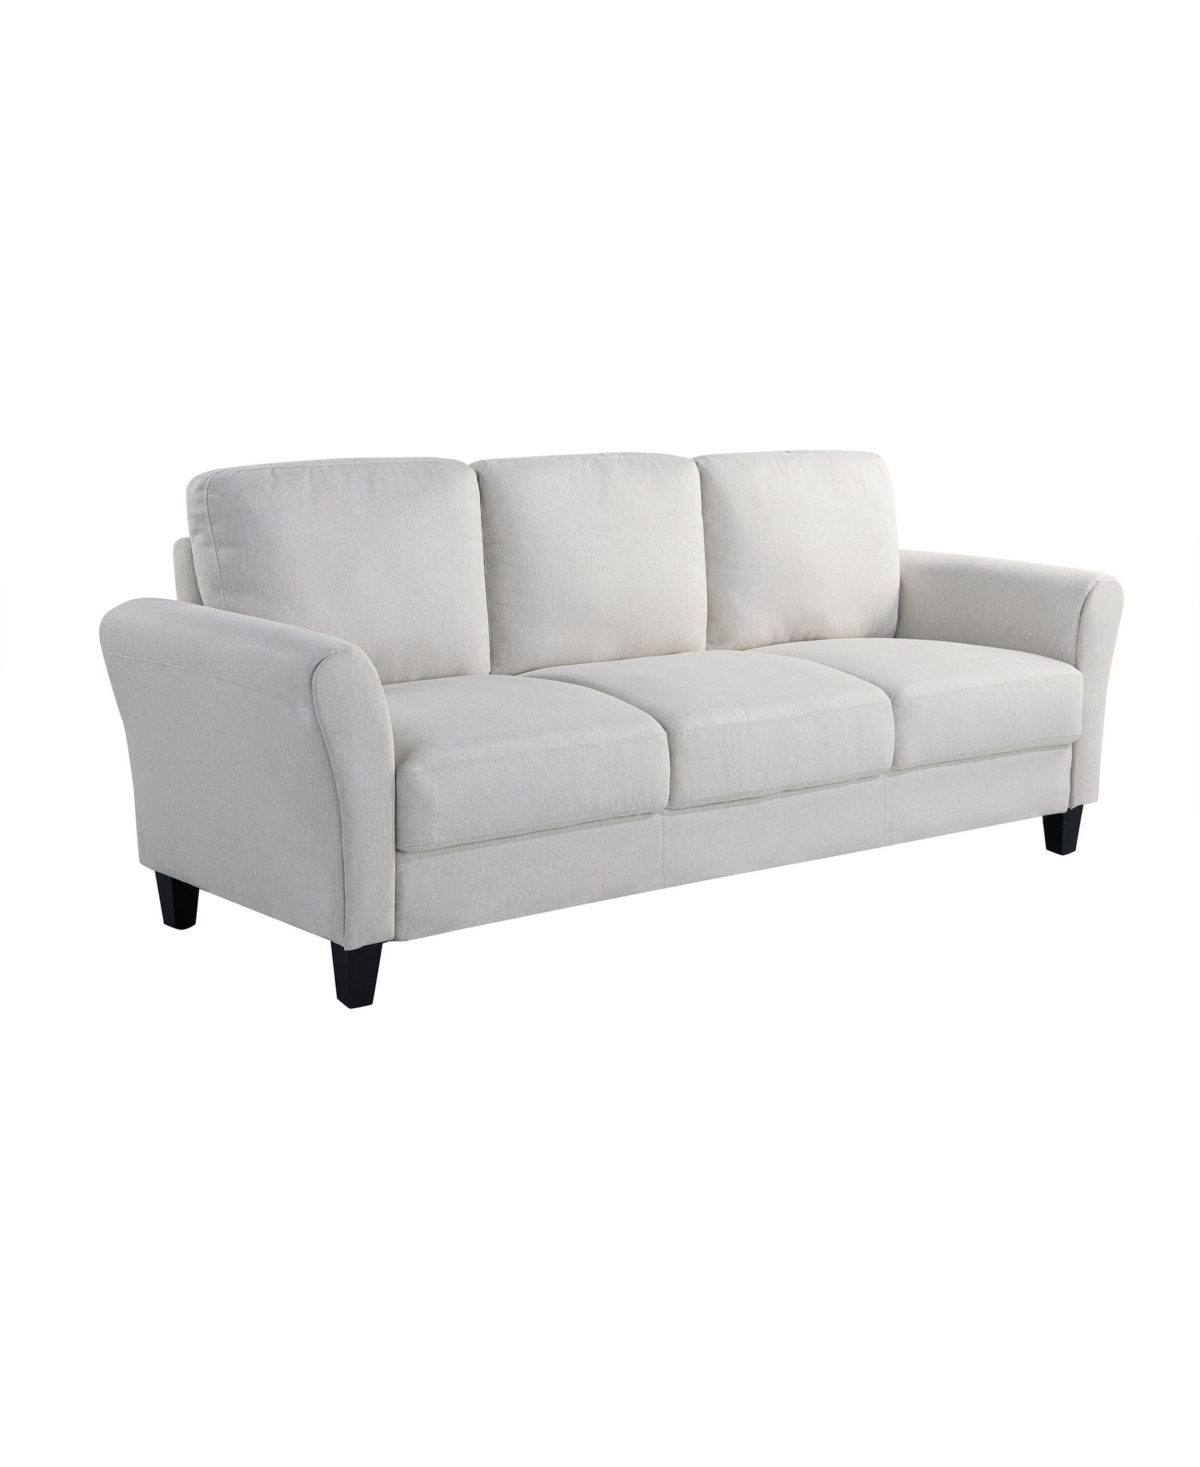 Shop Lifestyle Solutions 80.3" W Microfiber Wilshire Sofa With Rolled Arms In Oyster